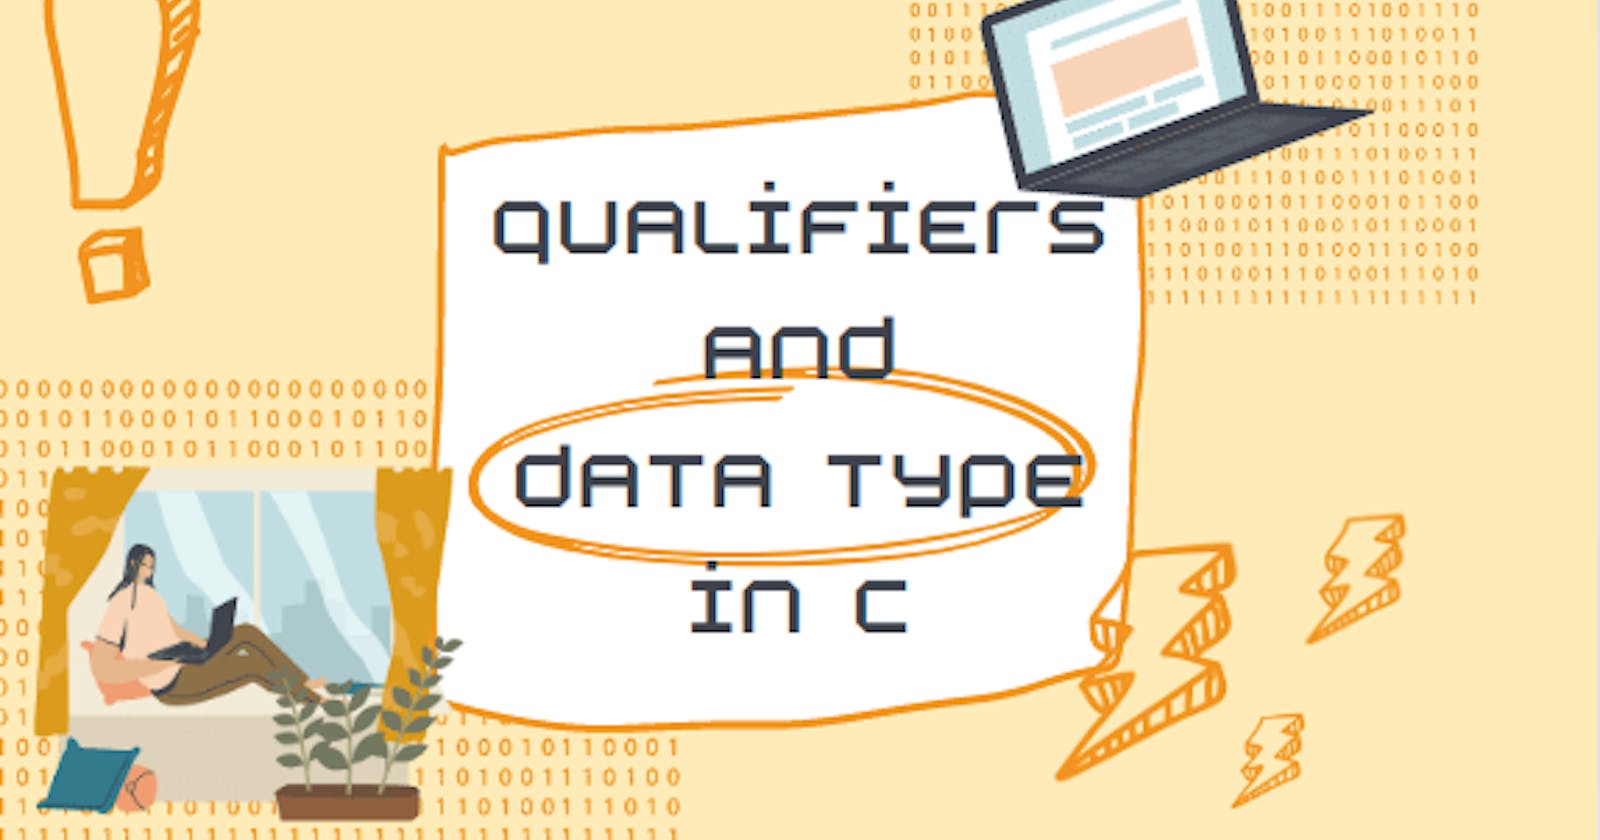 What is the difference between qualifiers and data type?